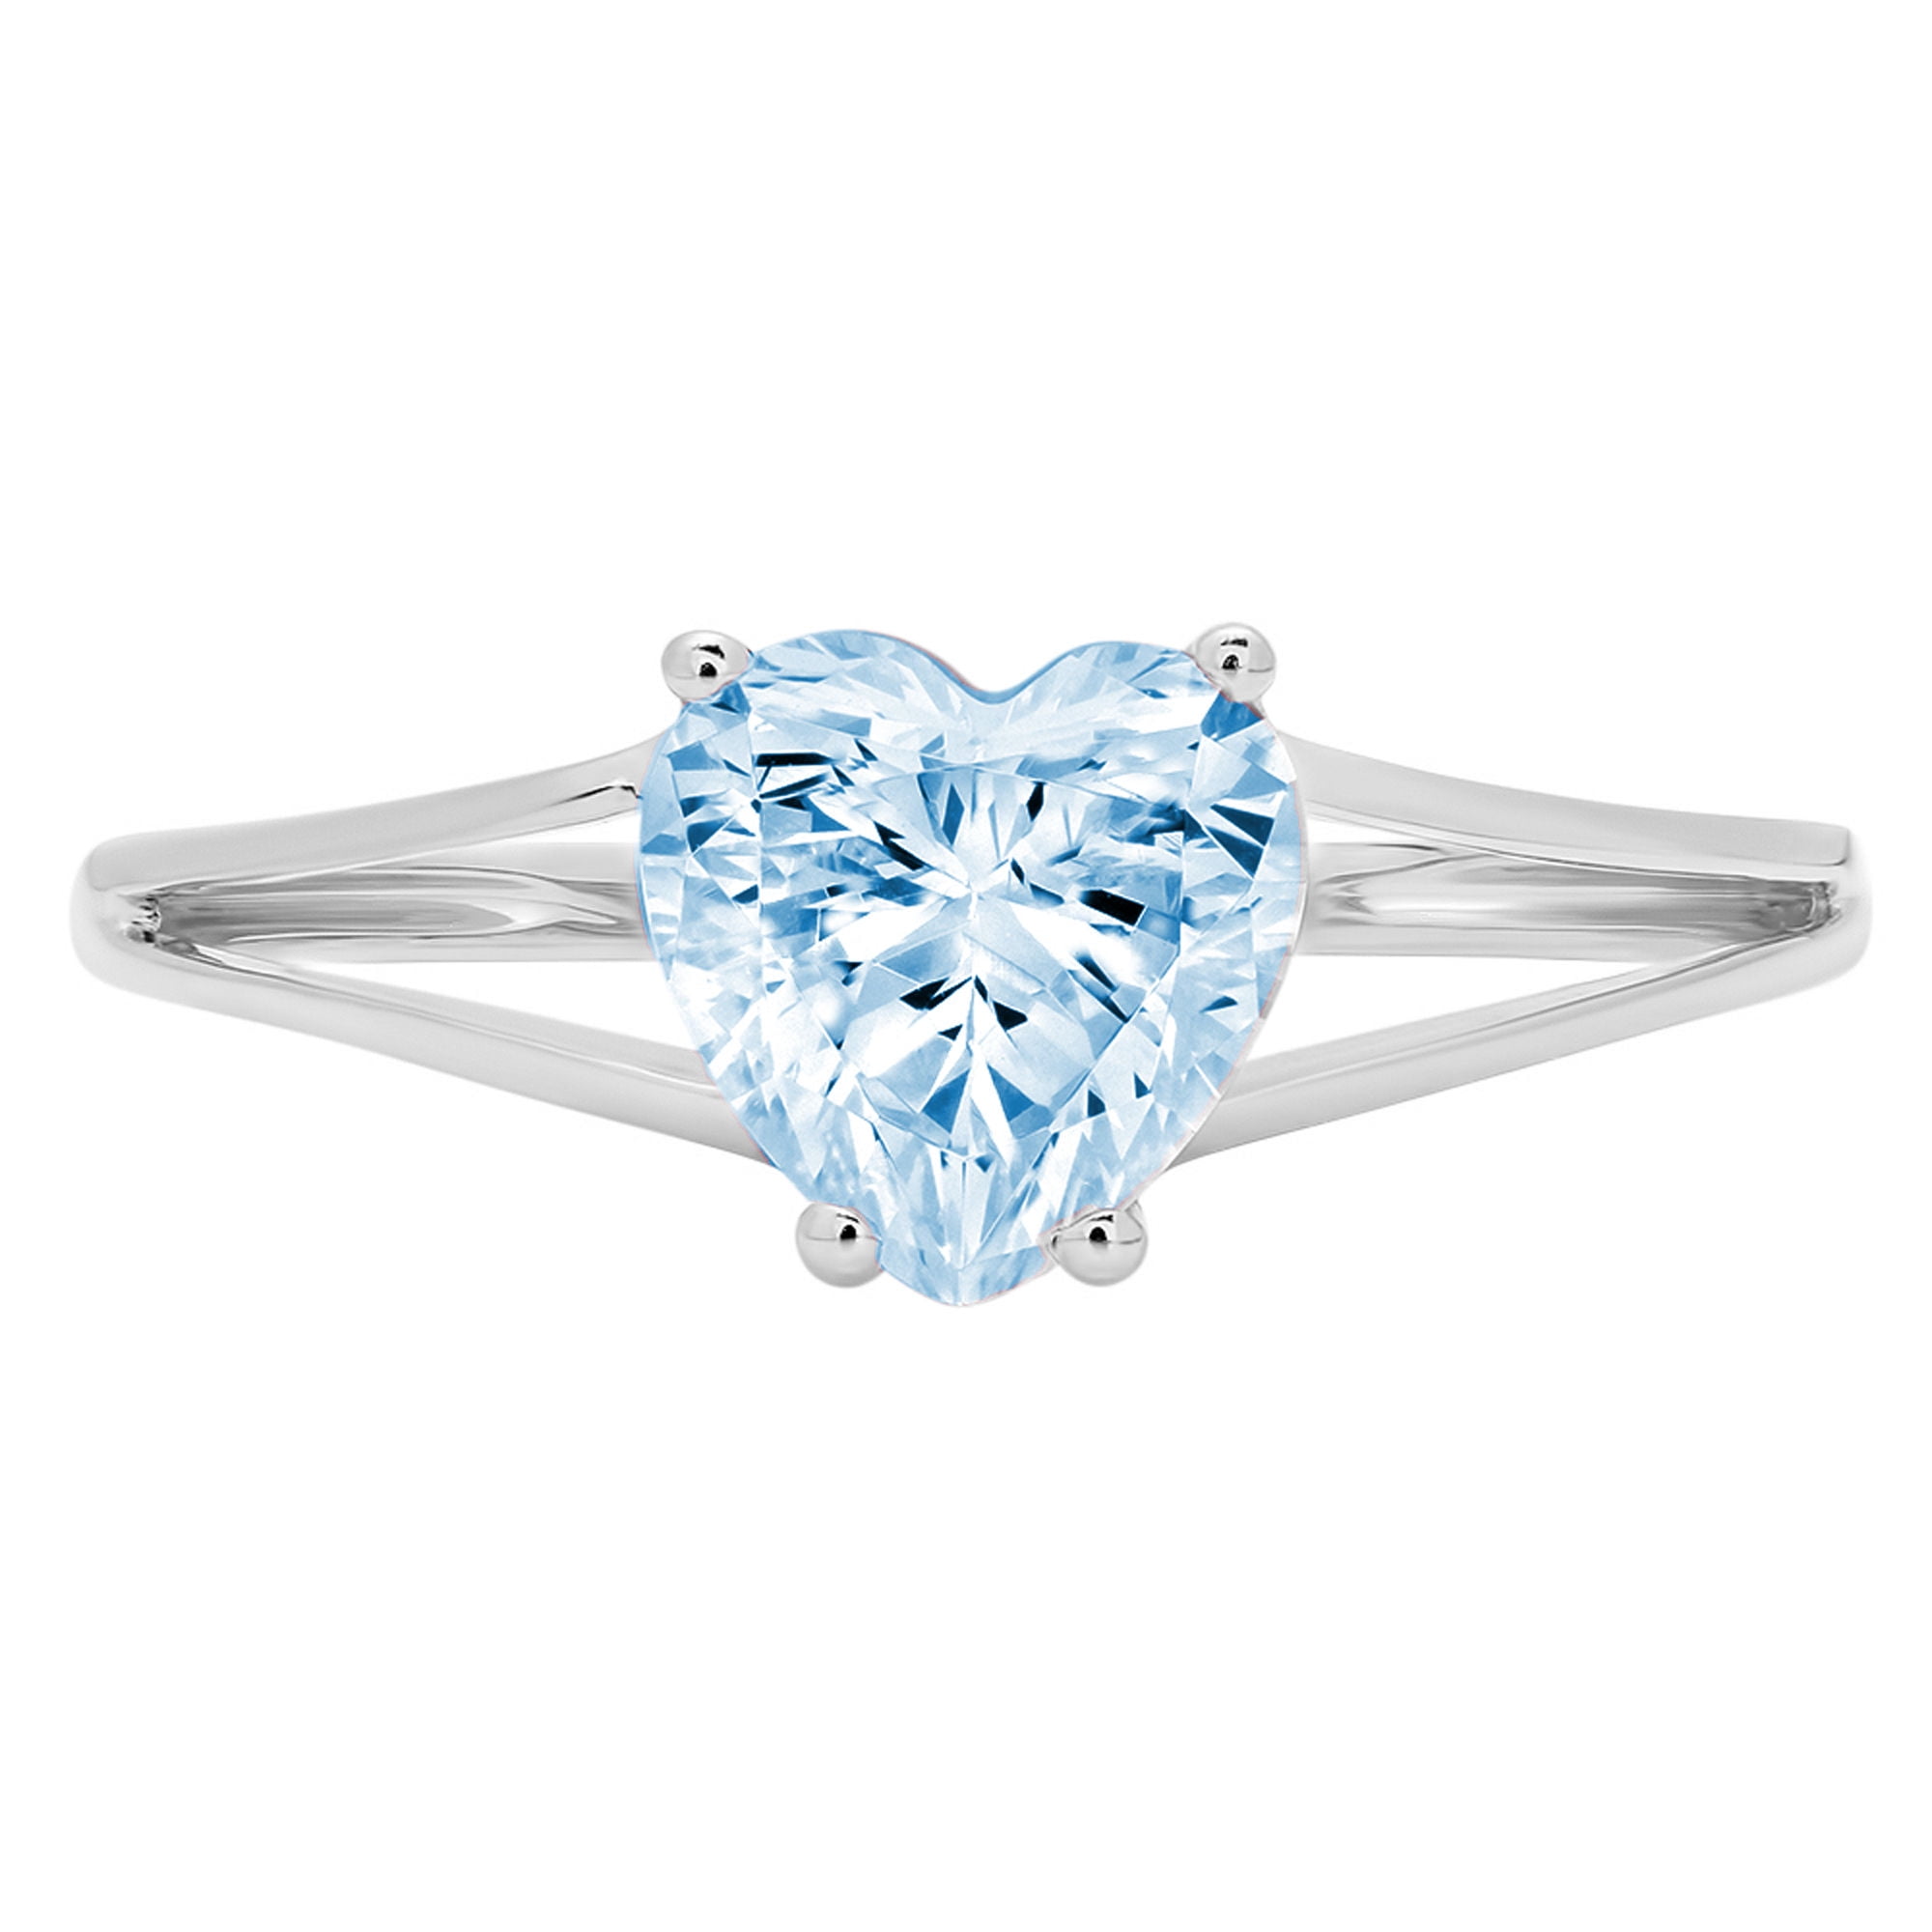 1.05 ct Brilliant Round Cut VVS1 Natural Sky Blue Topaz White Solid 14k or 18k Gold Robotic Laser Engraved Solitaire with Accents Ring